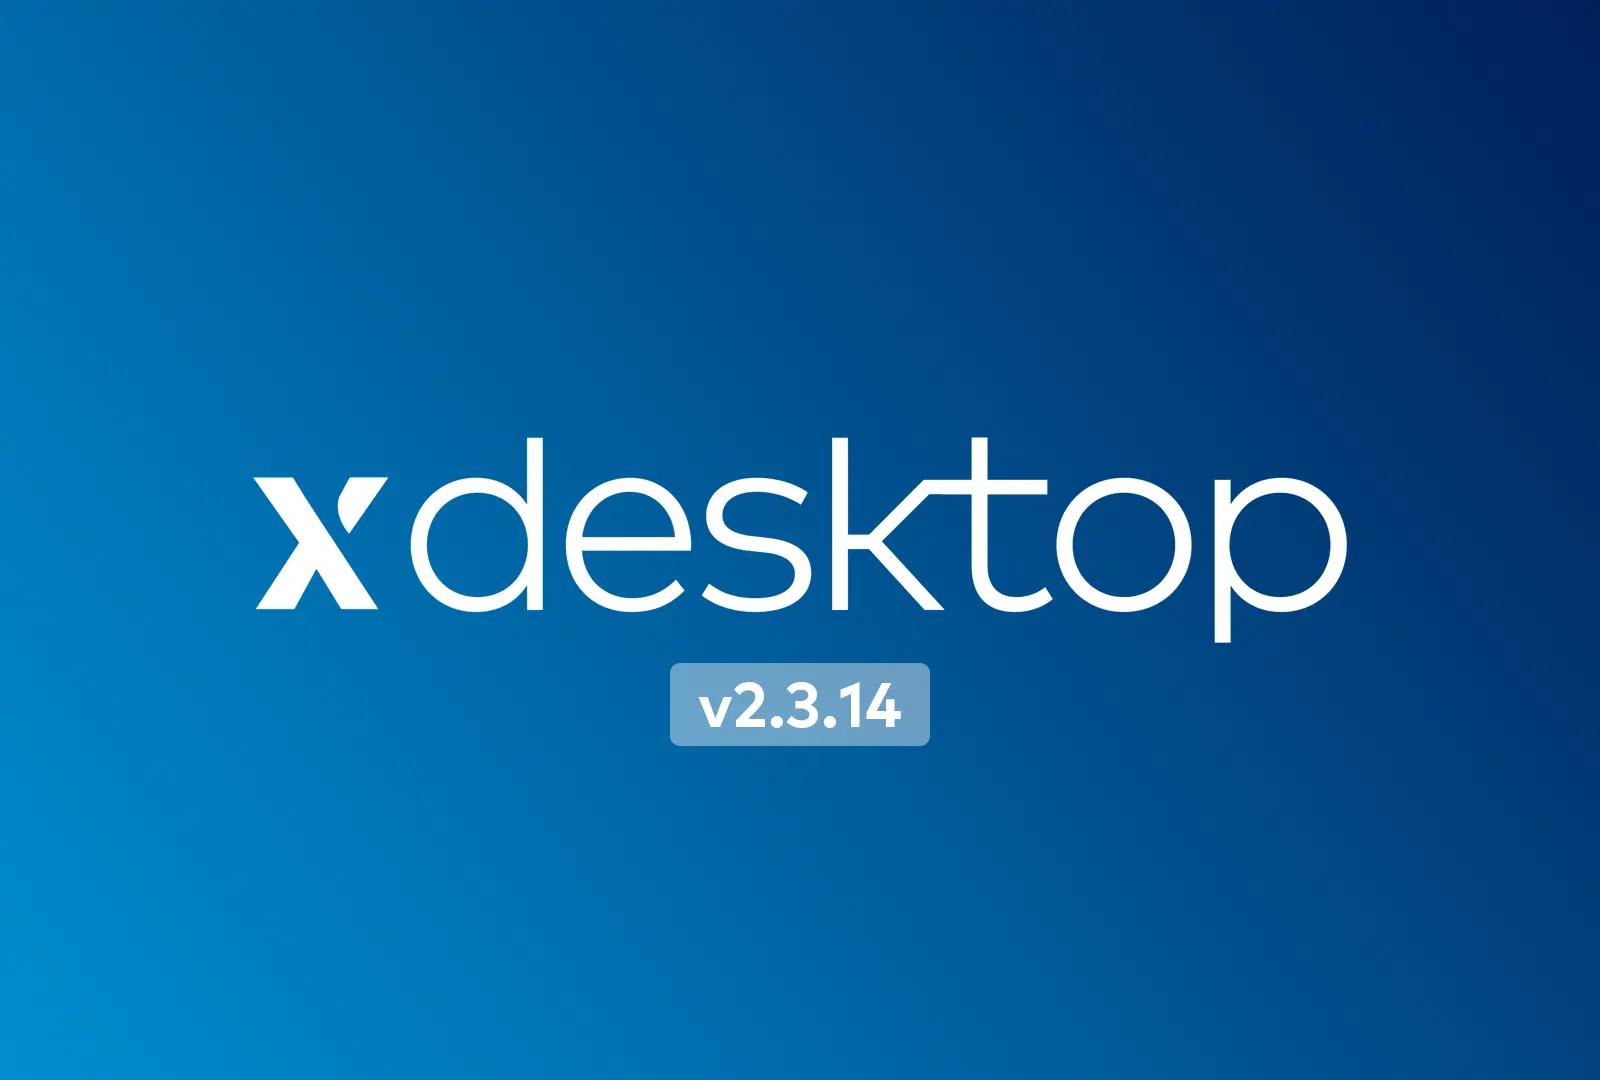 The New xDesktop 2.3.14 Version is Live!